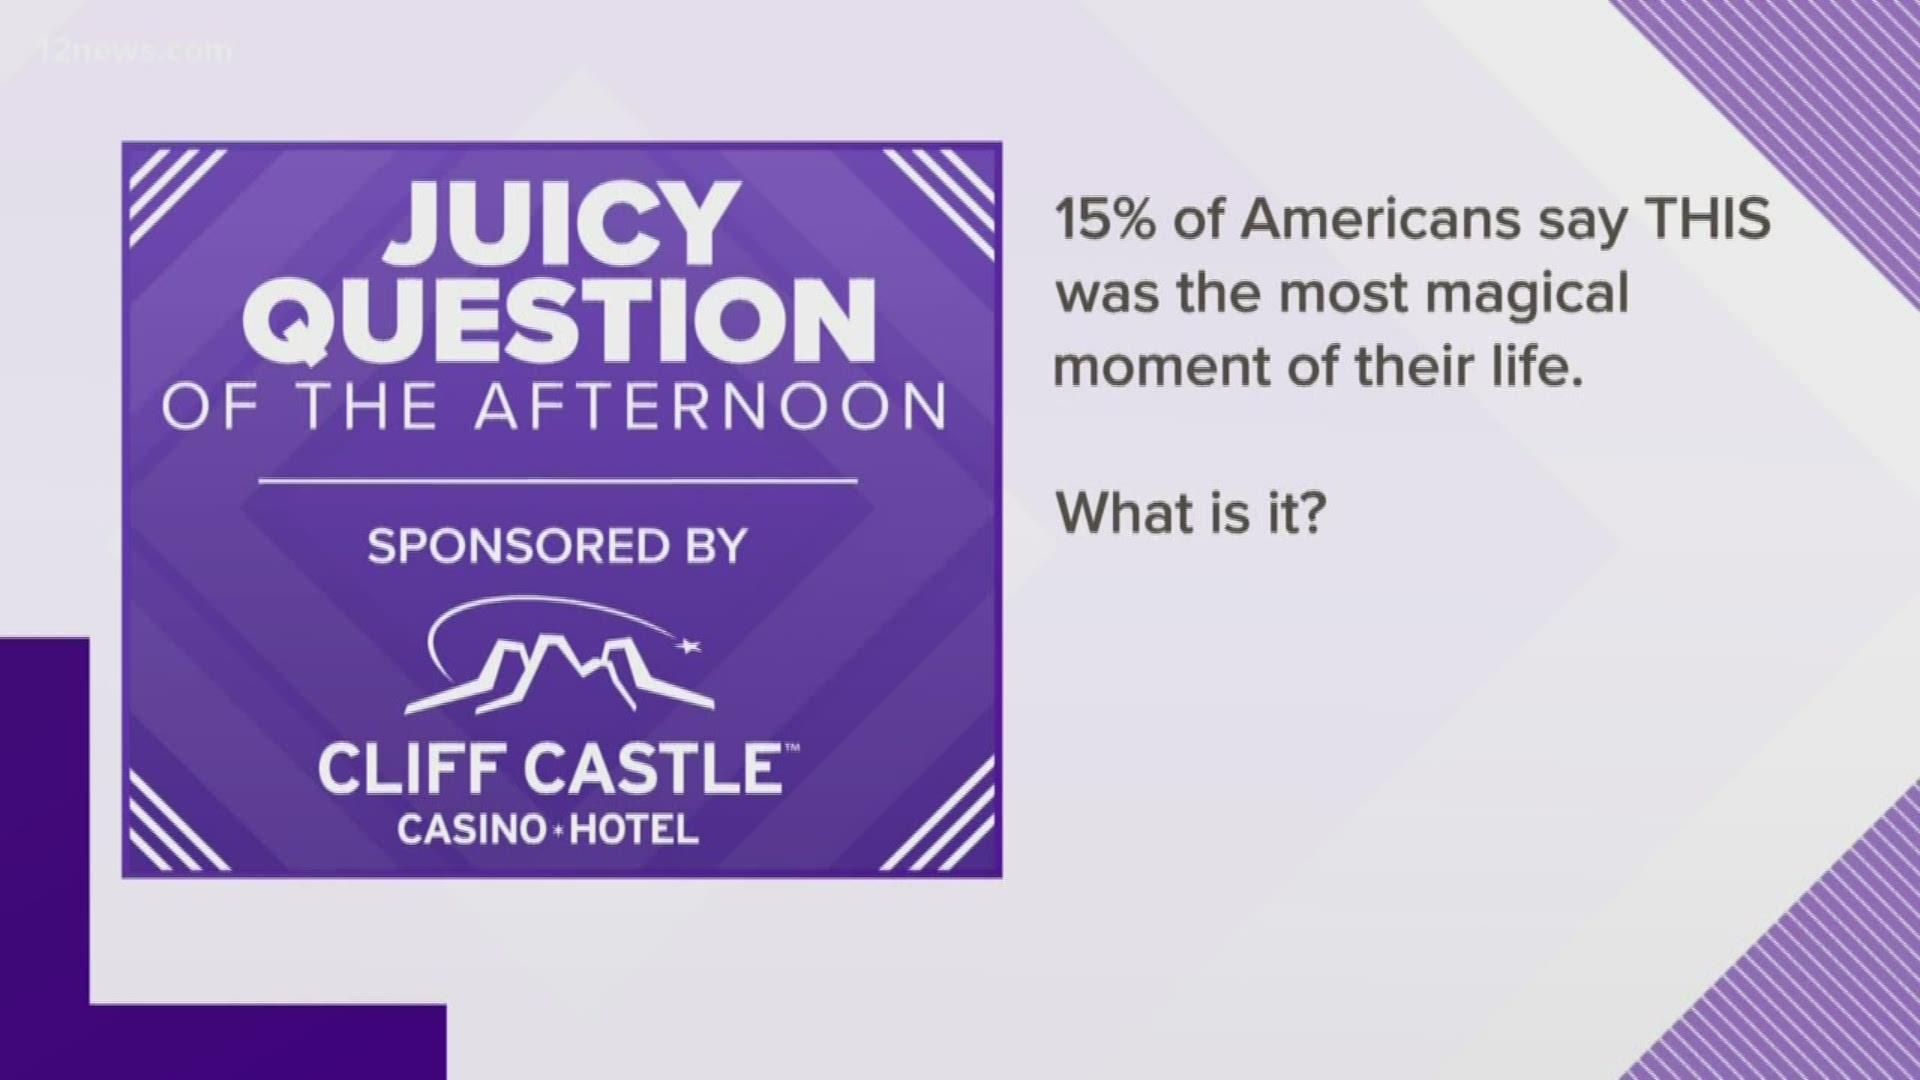 15% of Americans say THIS is the most magical moment of their life. What is it?